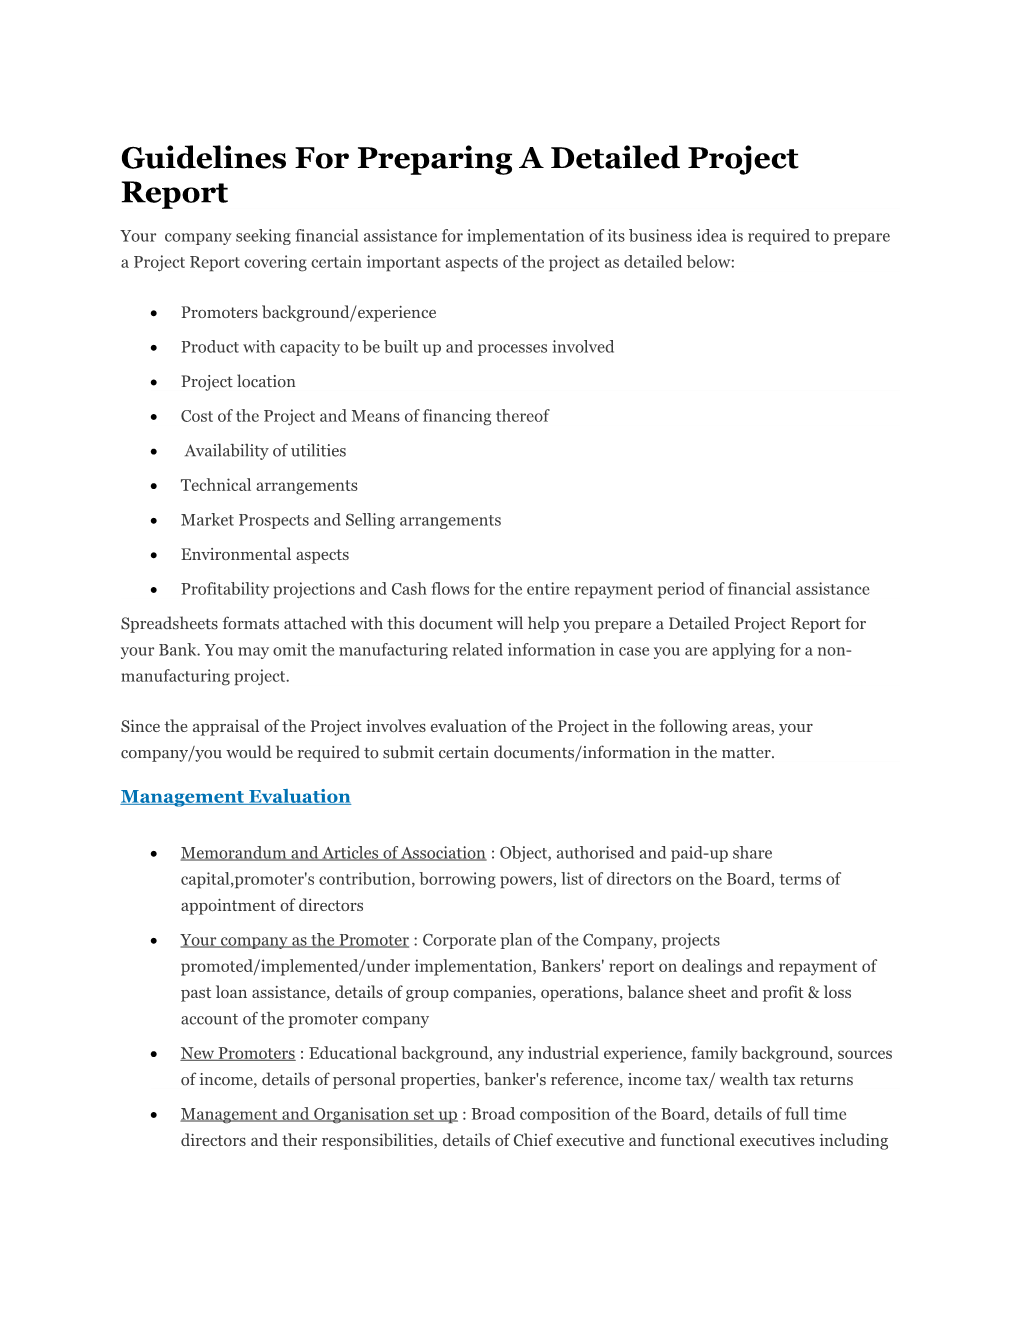 Guidelines for Preparing a Detailed Project Report